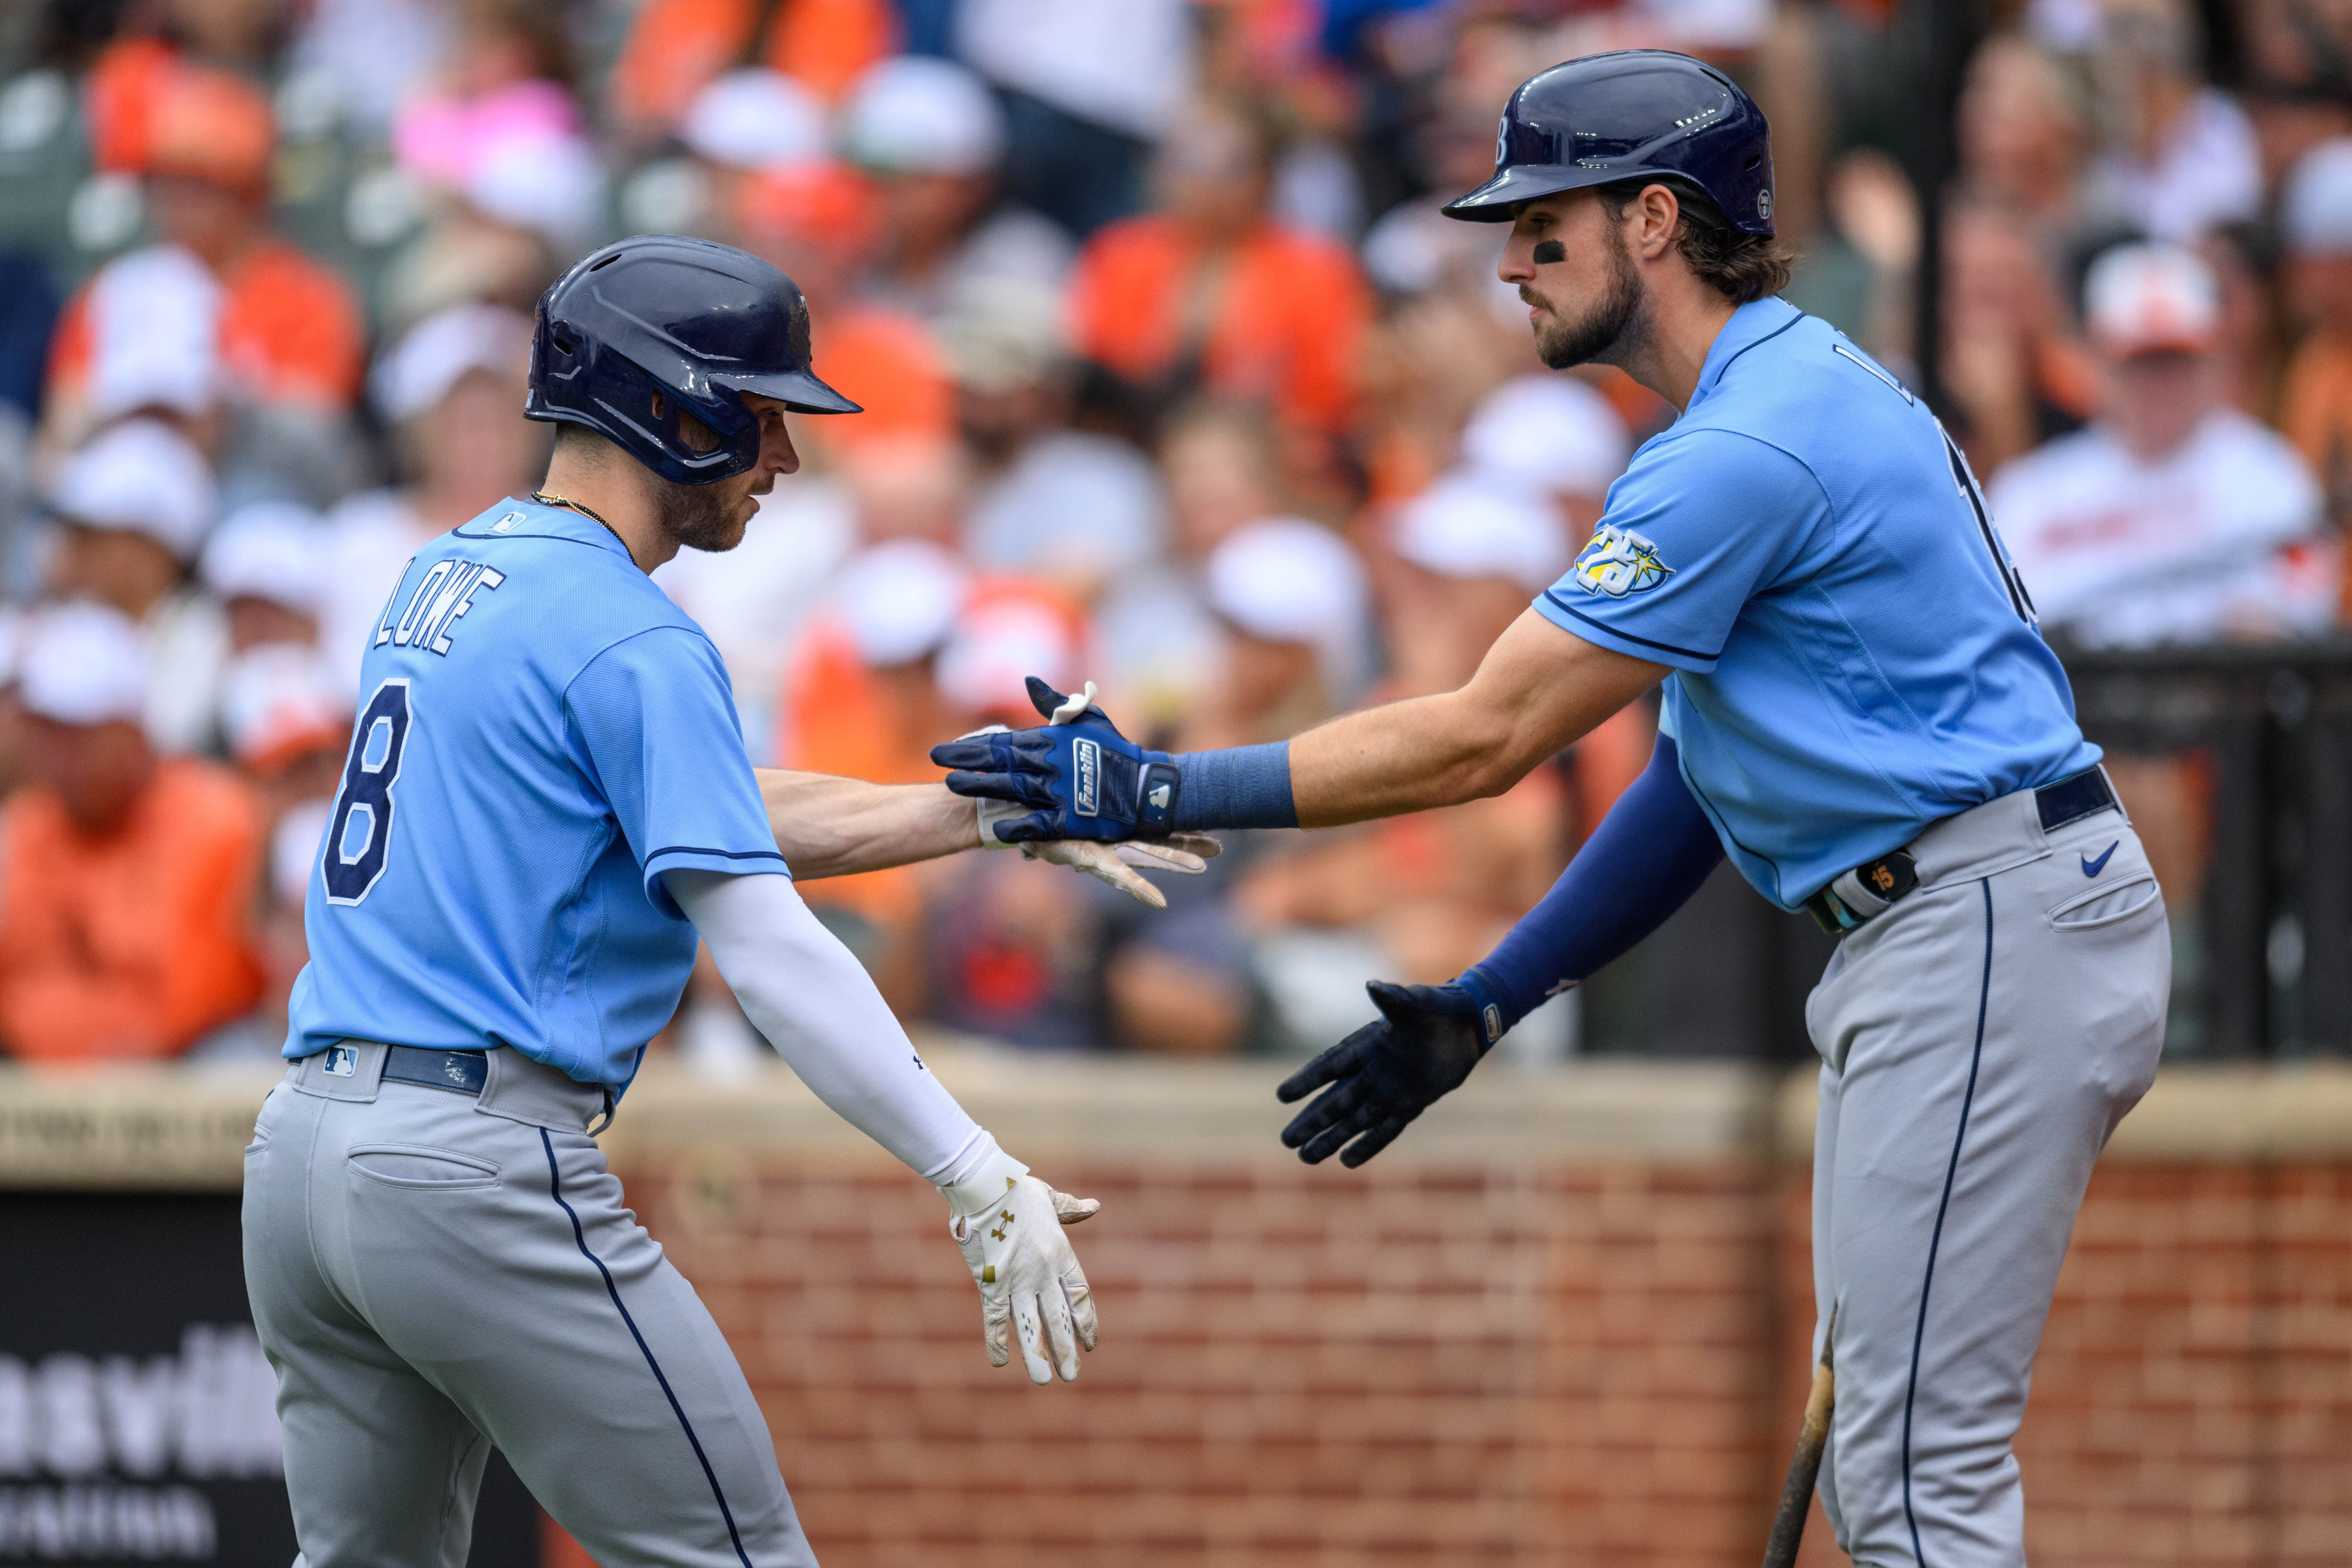 Orioles beat Rays, clinch first playoff spot since 2016